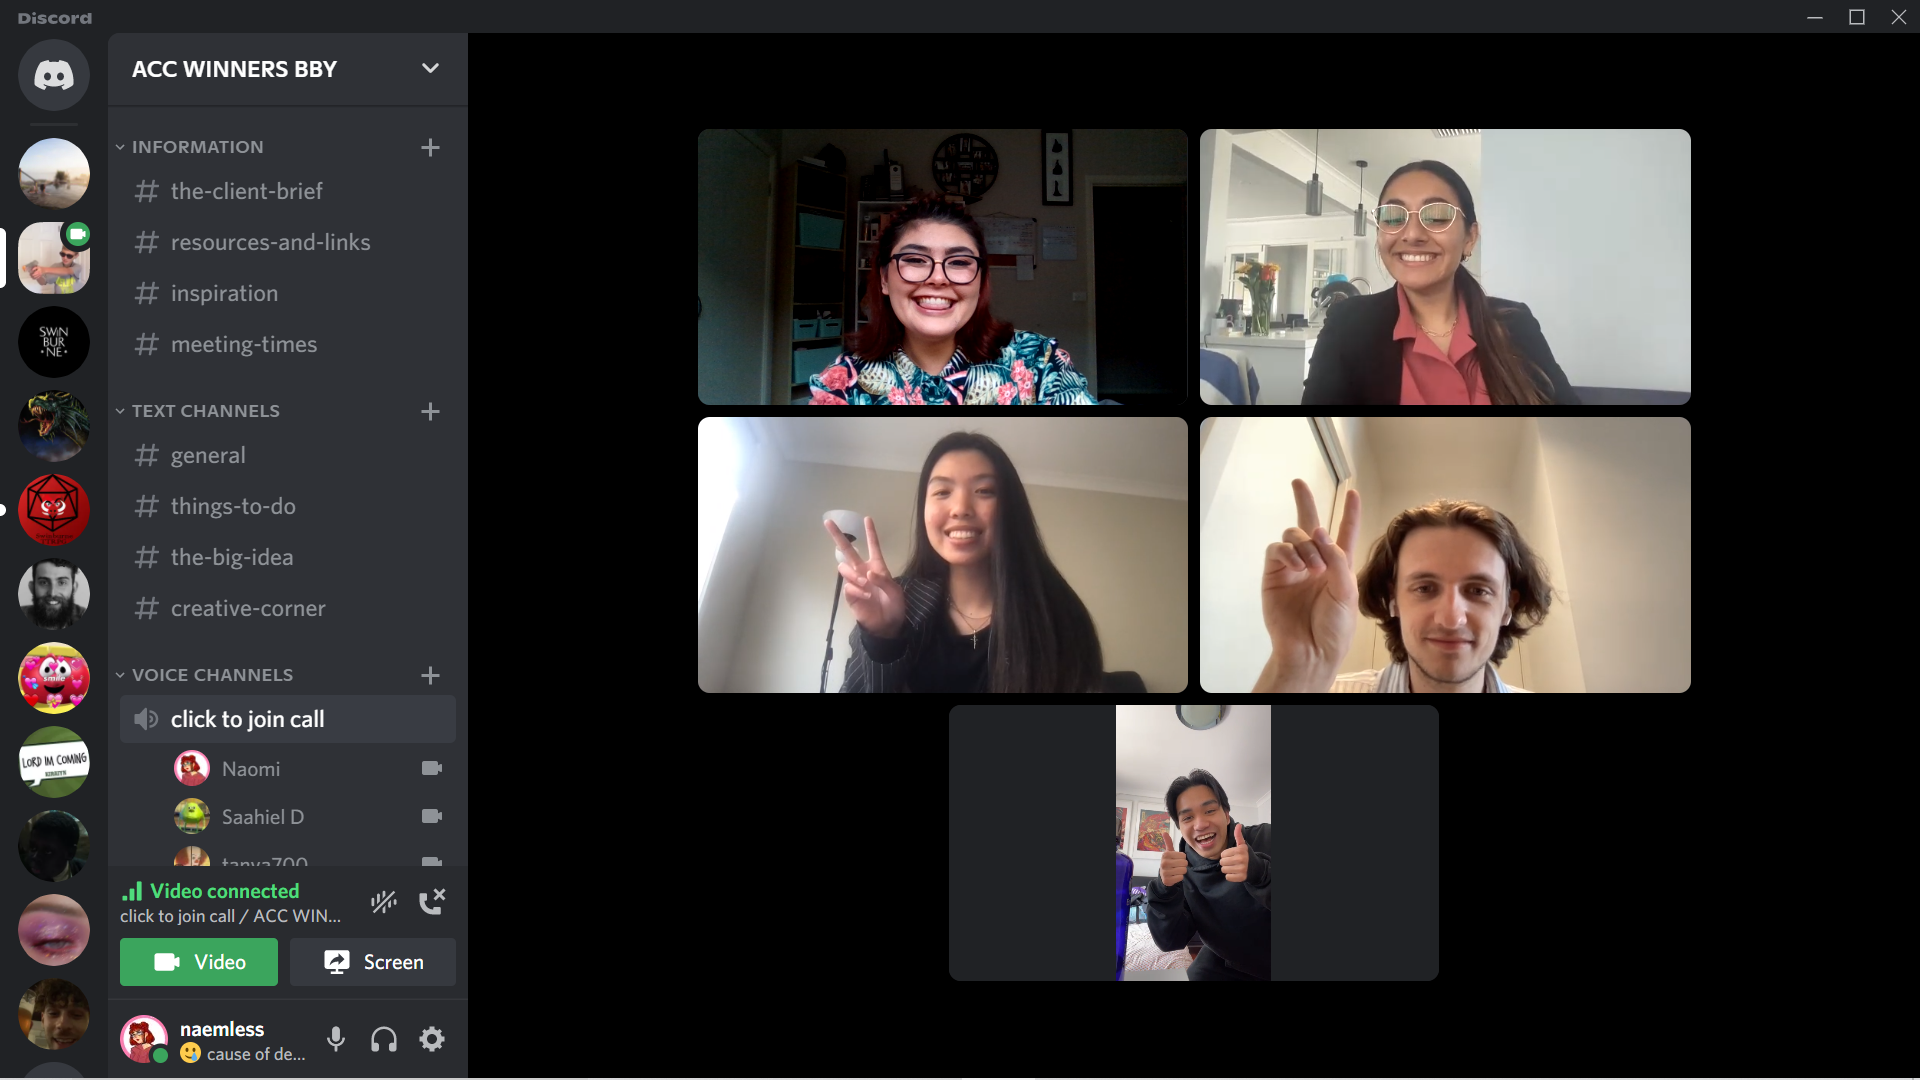 Five Swinburne students from the winning team are all smiles on their Zoom call